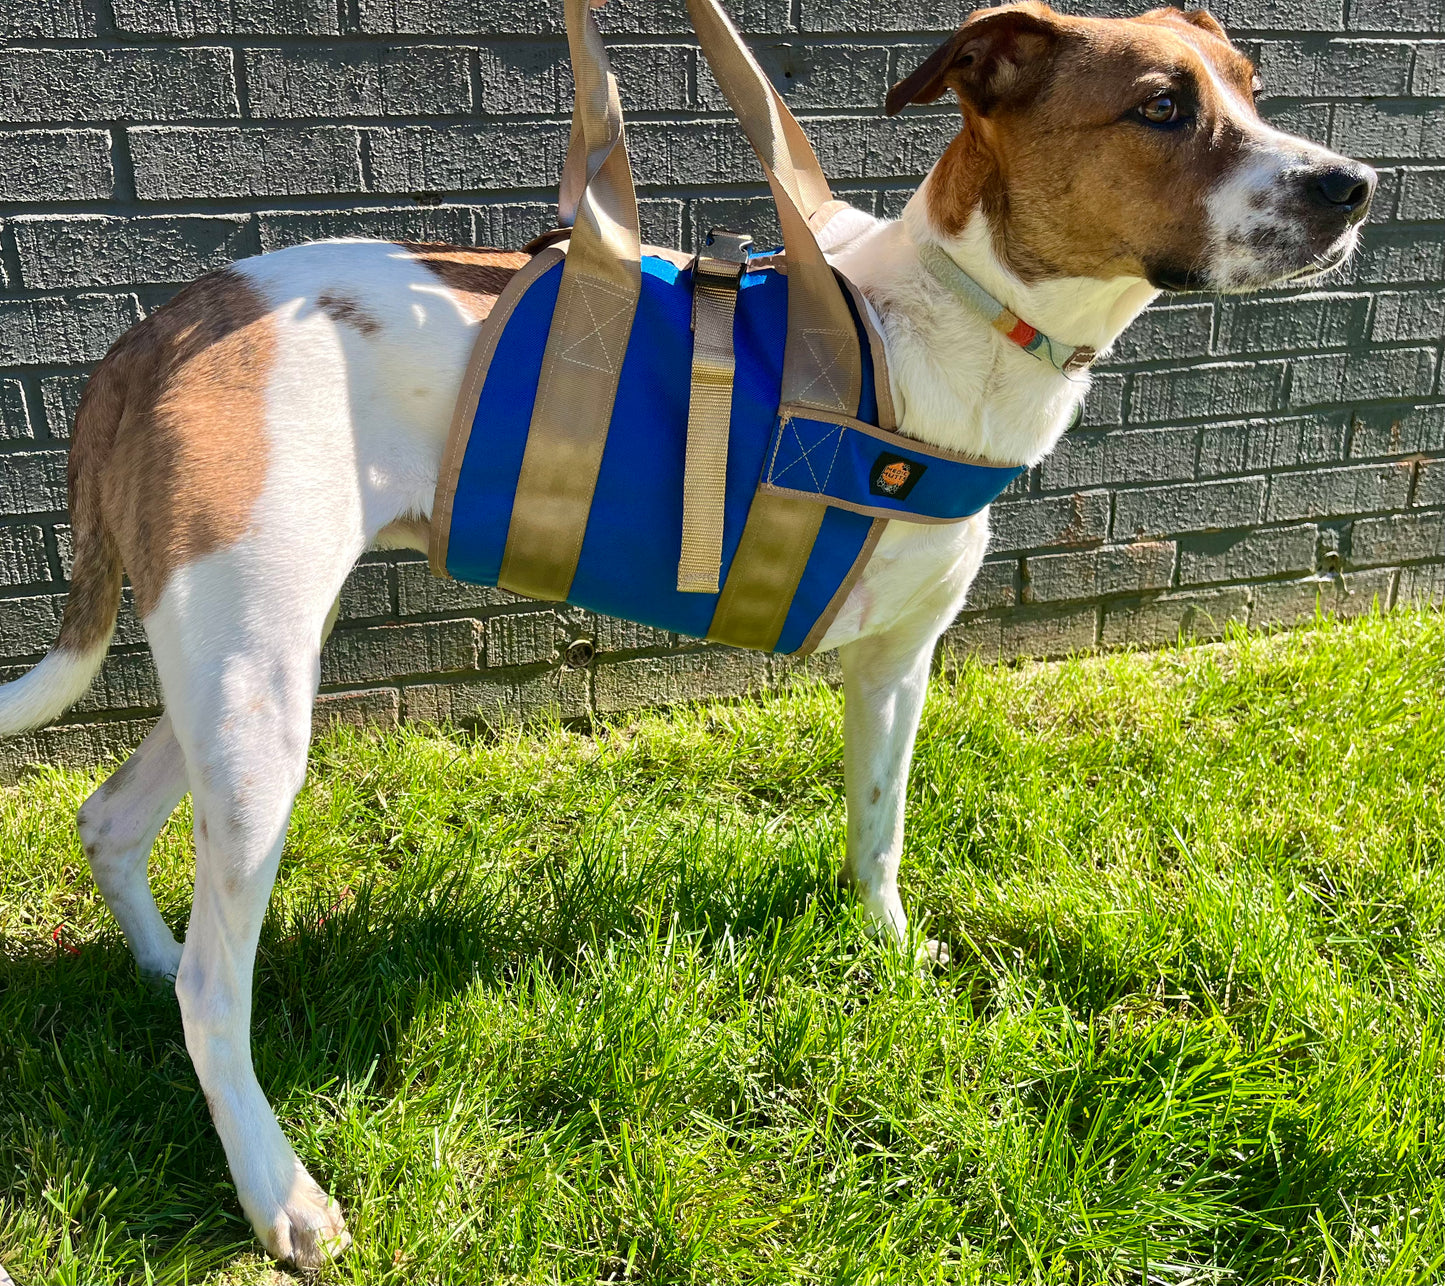 The blue/Medium sling safely supports any pup from 30lbs to 80lbs